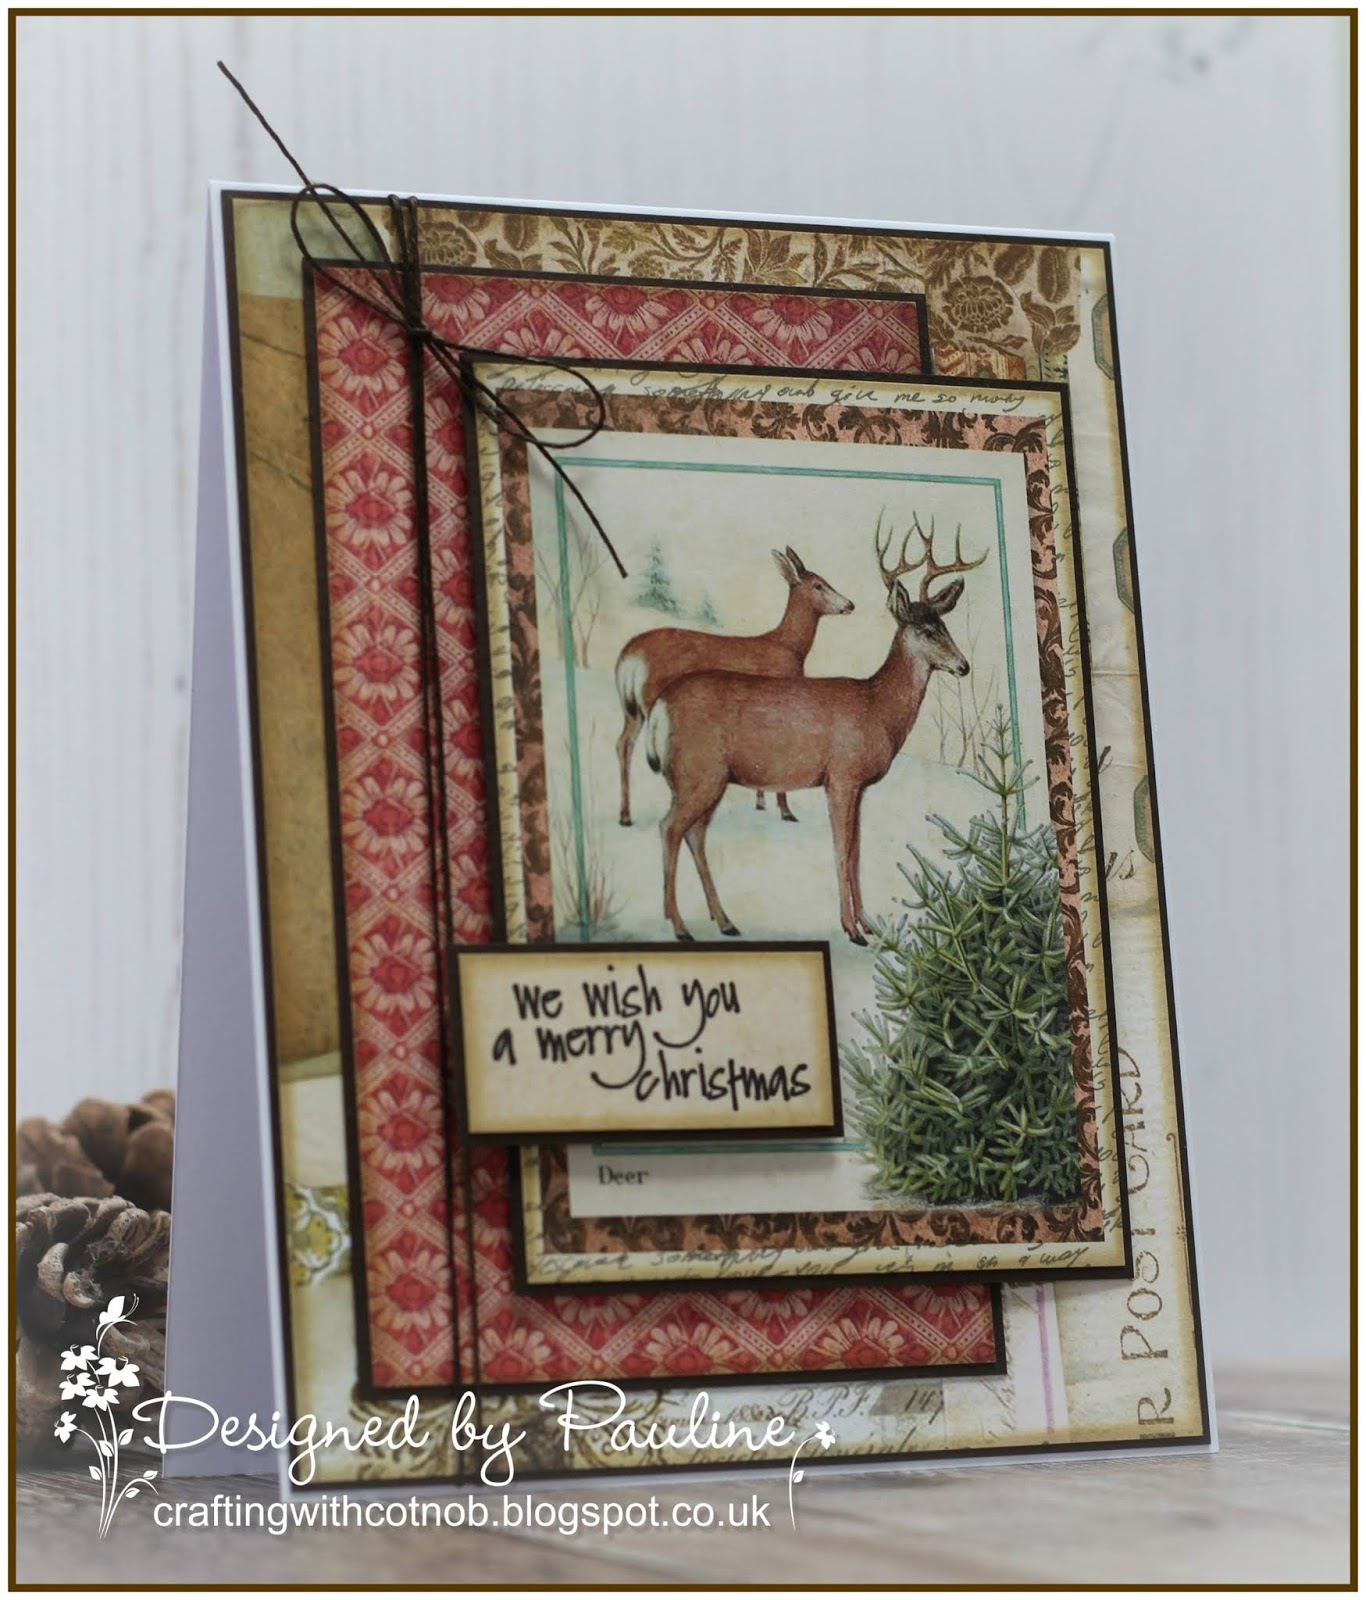 Crafting with Cotnob: Christmas Deer